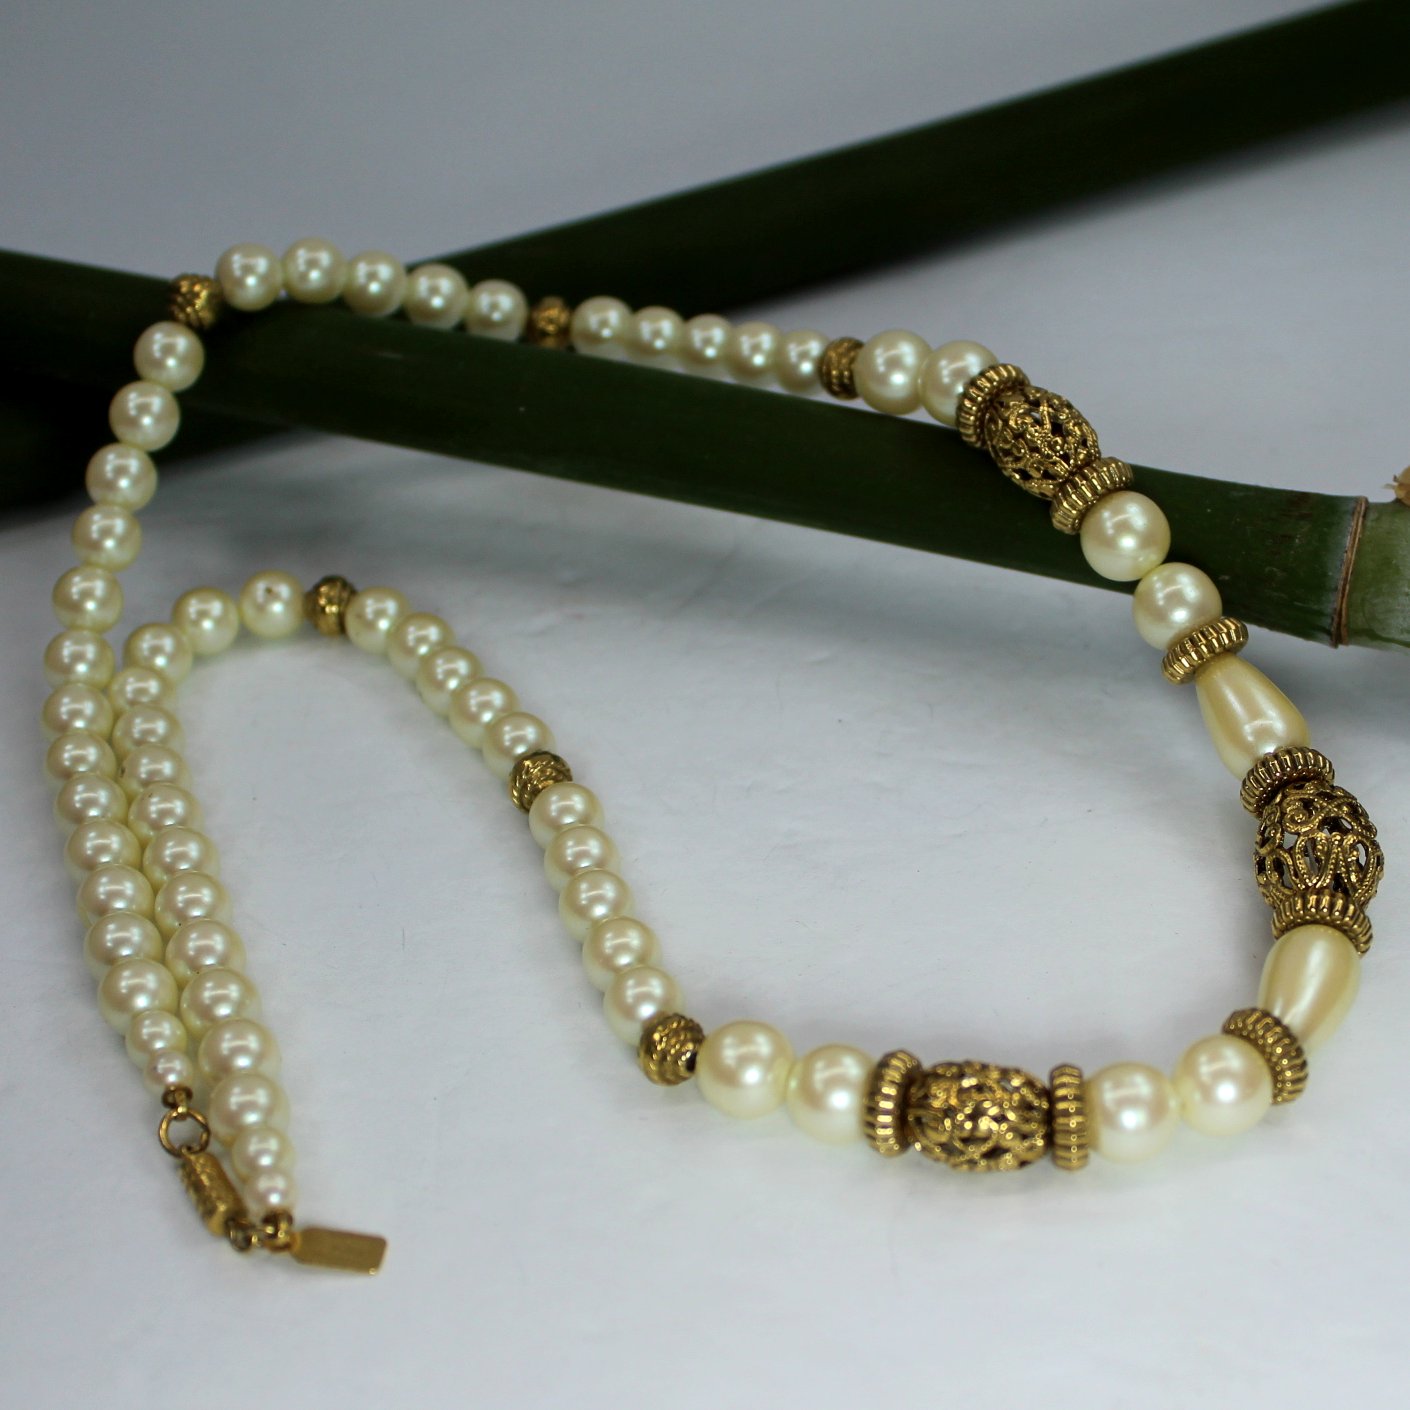 Maker 1928 Necklace Goldtone Filigree Pearls 18" Great Look flat view